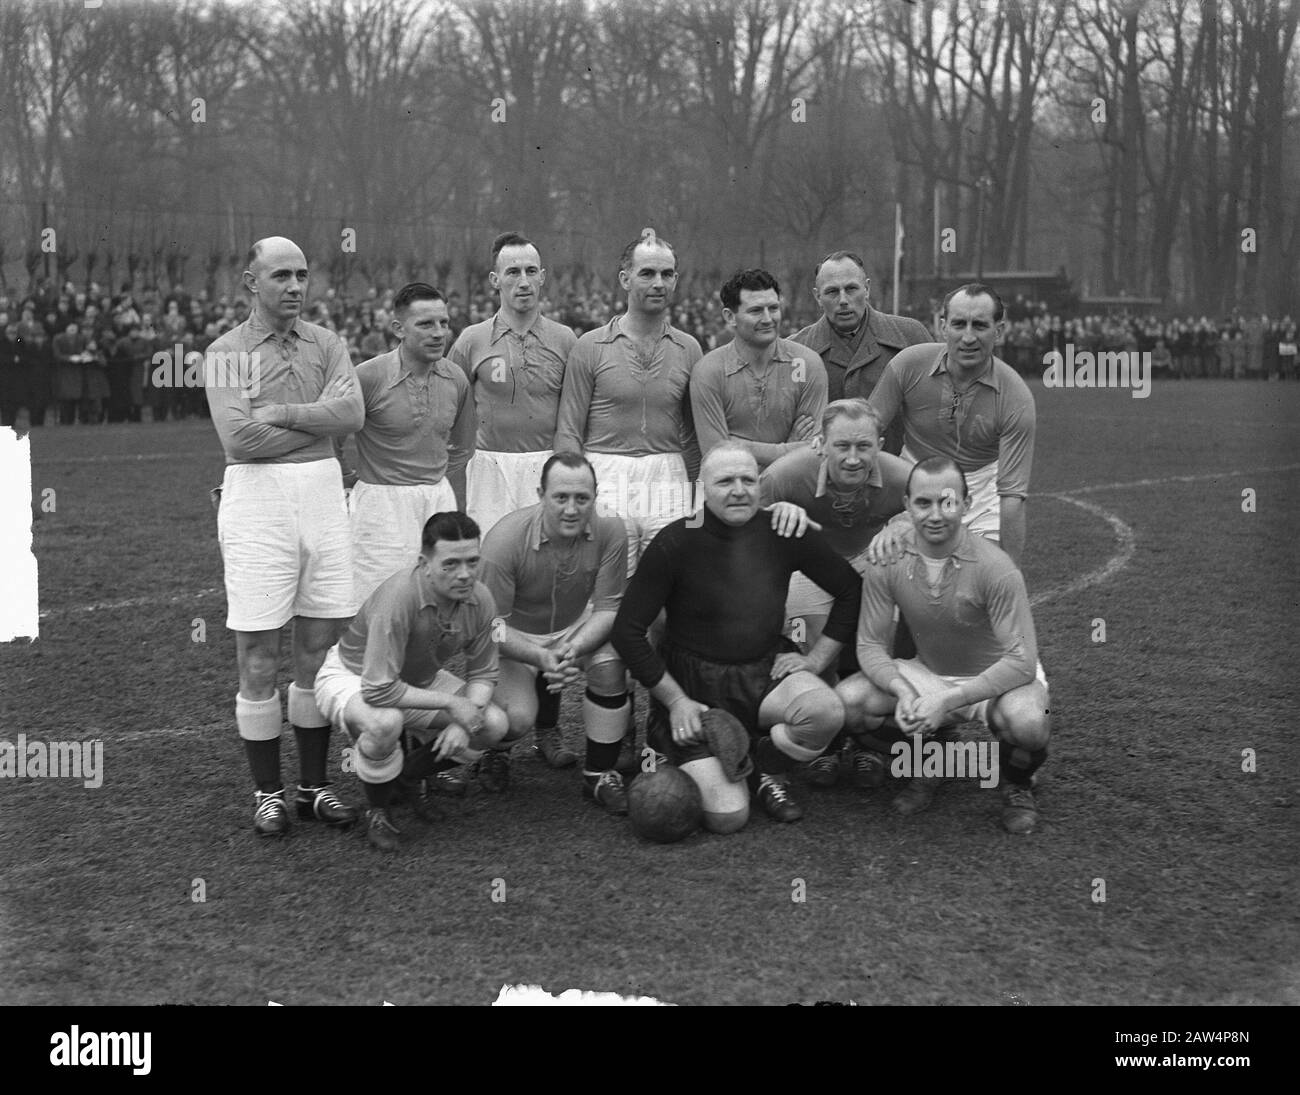 Oudi nter-nationals and HFC. Team Former Internationals Date: January 1, 1950 Location: Haarlem Keywords: teams, sports, football Stock Photo